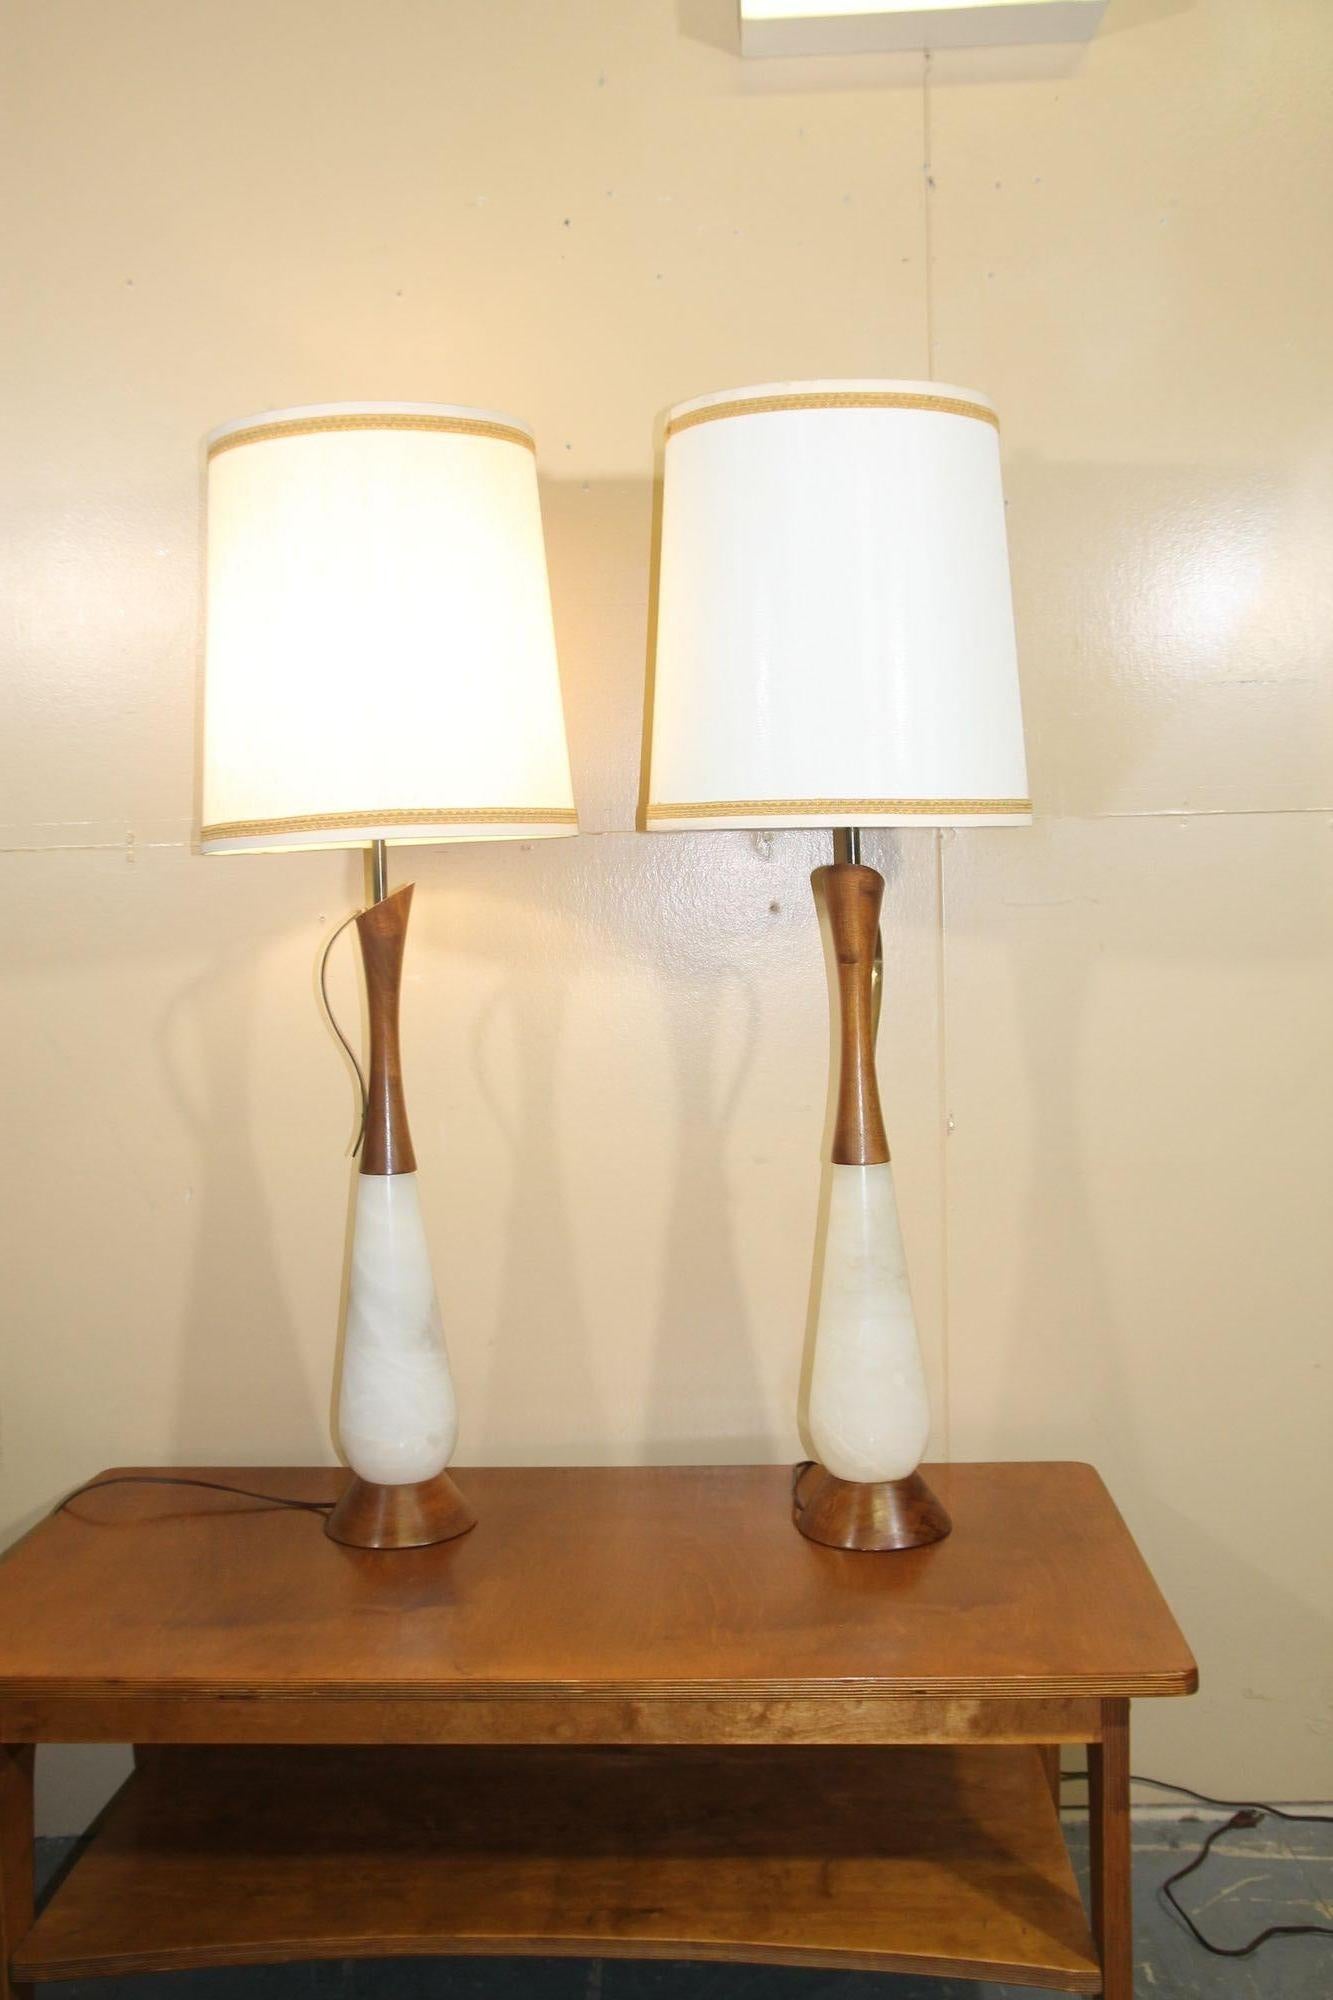 Pleased to offer this great pair of Italian table lamps. These alabaster lamps have walnut base and top as well as brass handle. These lamps retain their original shades and alasbaster finials. This pair of lights will look amazing in any decor.